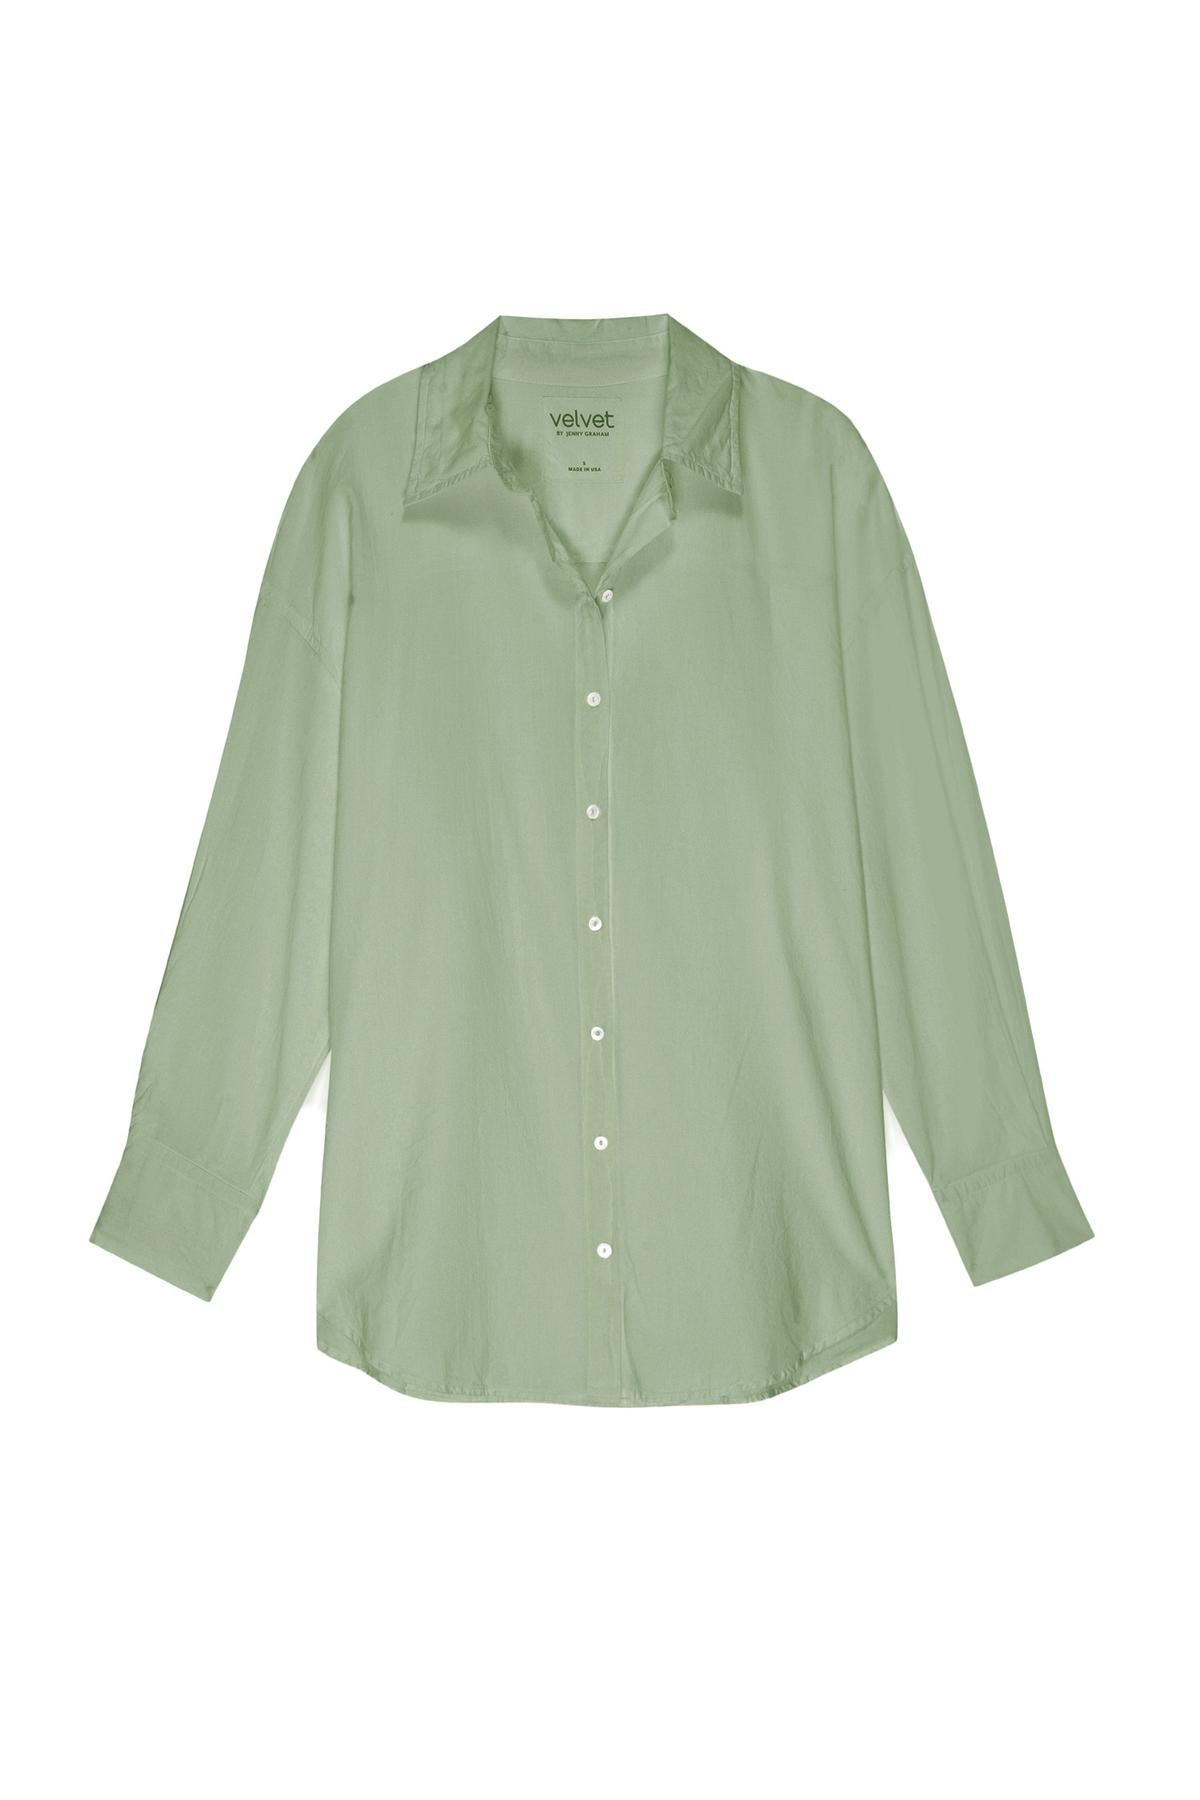   An oversized women's Redondo Button-Up Shirt in sage green by Velvet by Jenny Graham. 